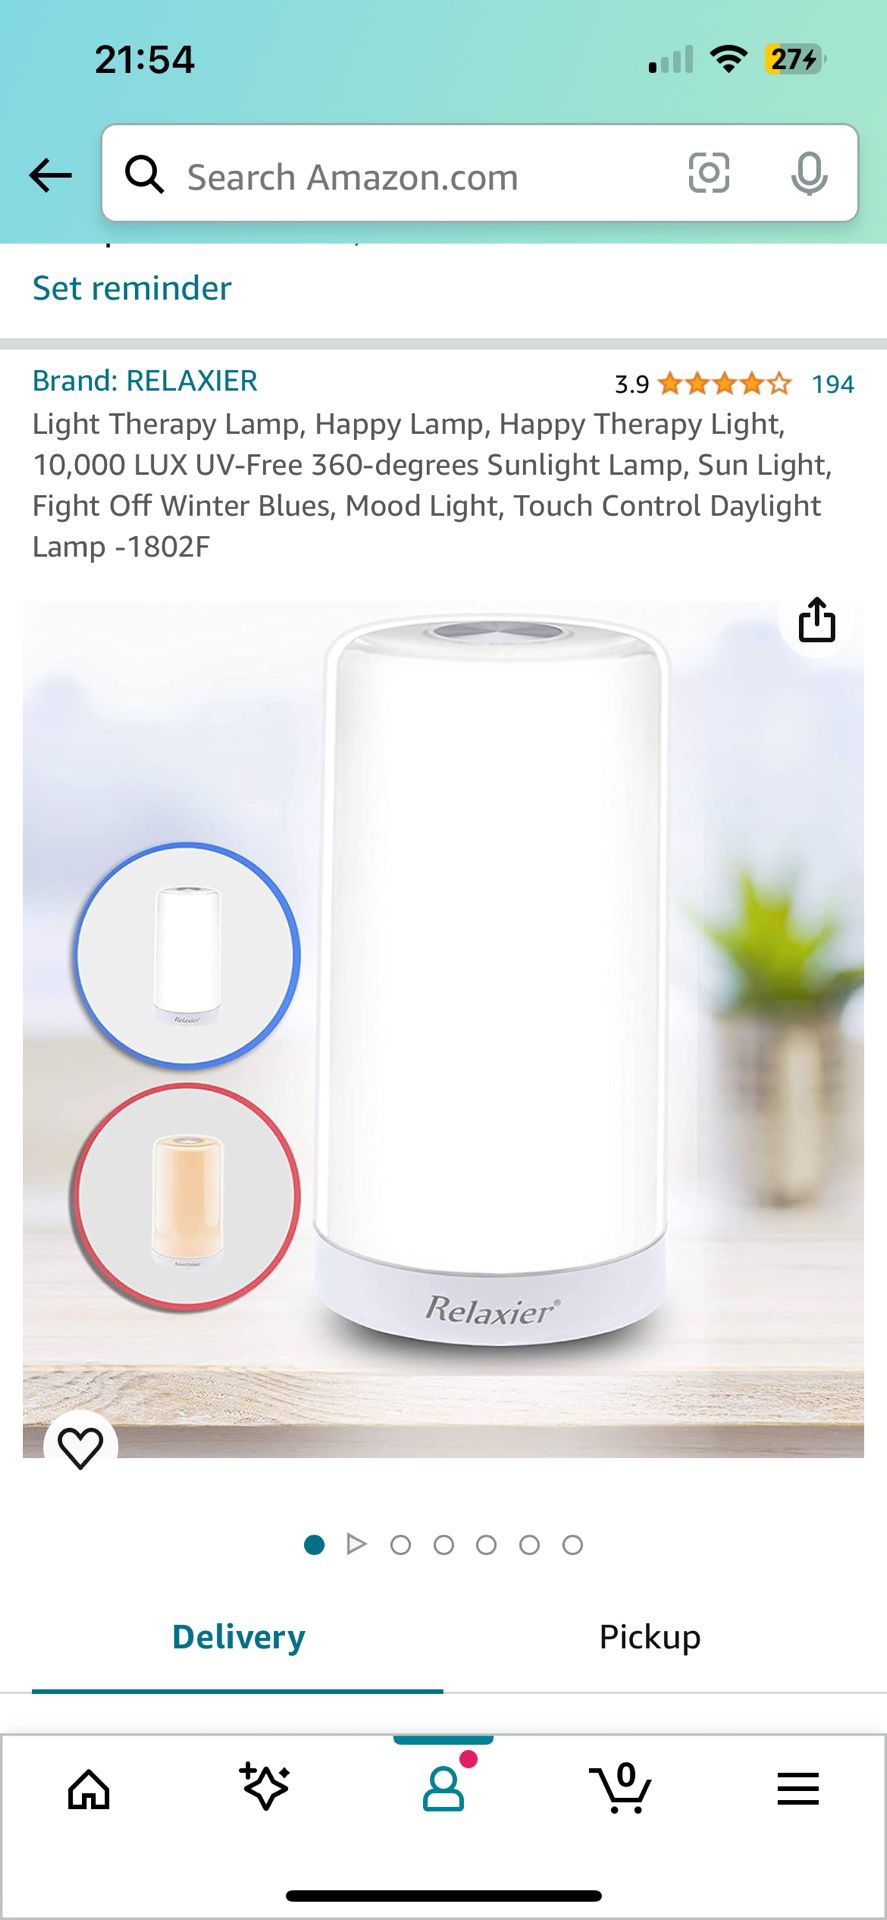 Relaxier Light Therapy Lamp, Happy Lamp, Happy Therapy Light